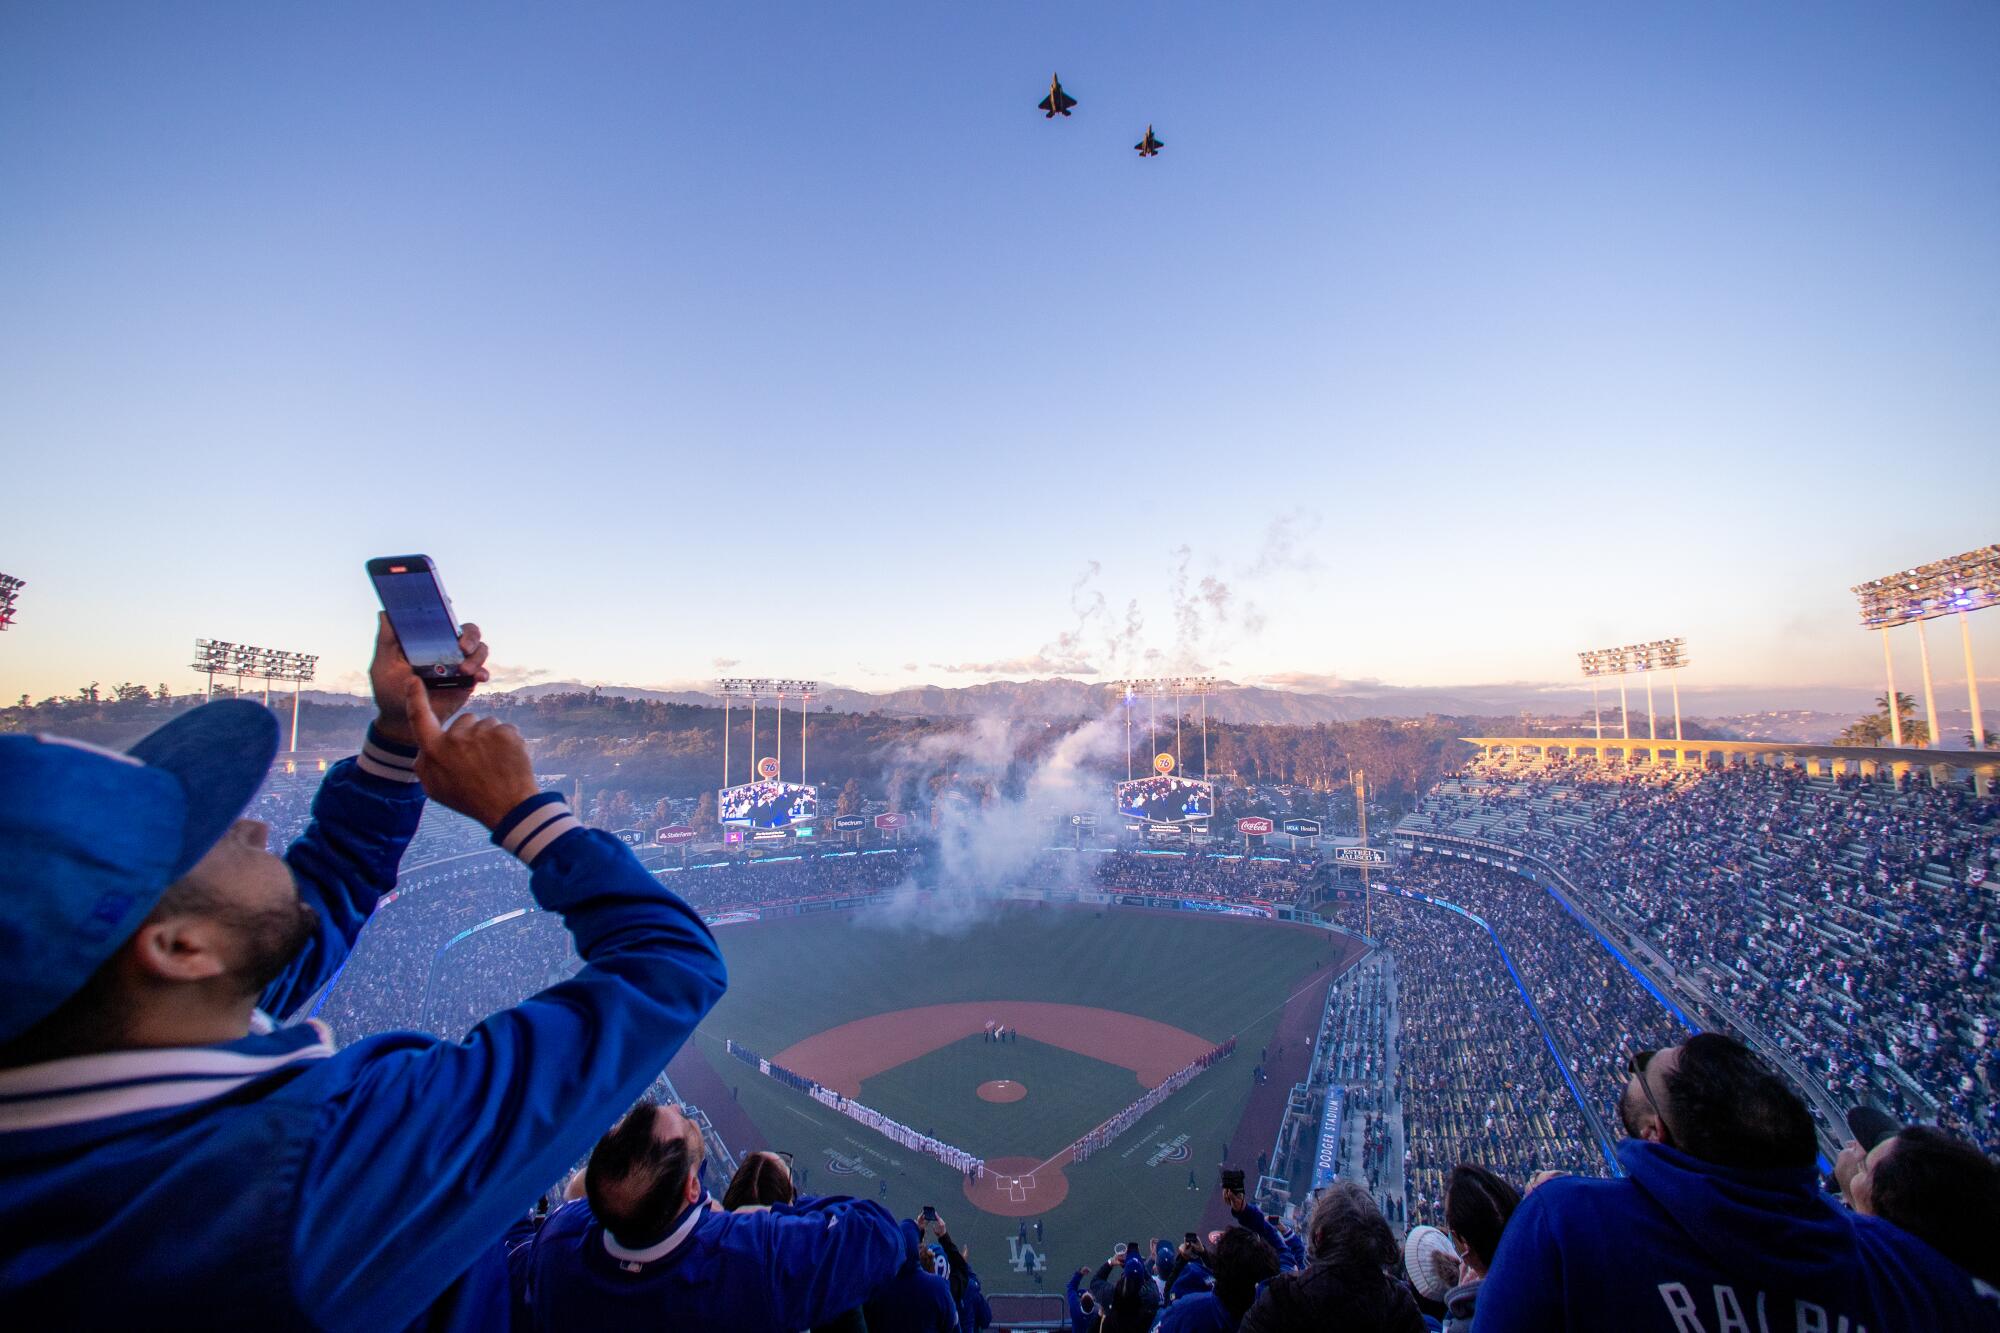 A fan takes a photo of a military flyover at Dodger Stadium before Thursday's season opener.